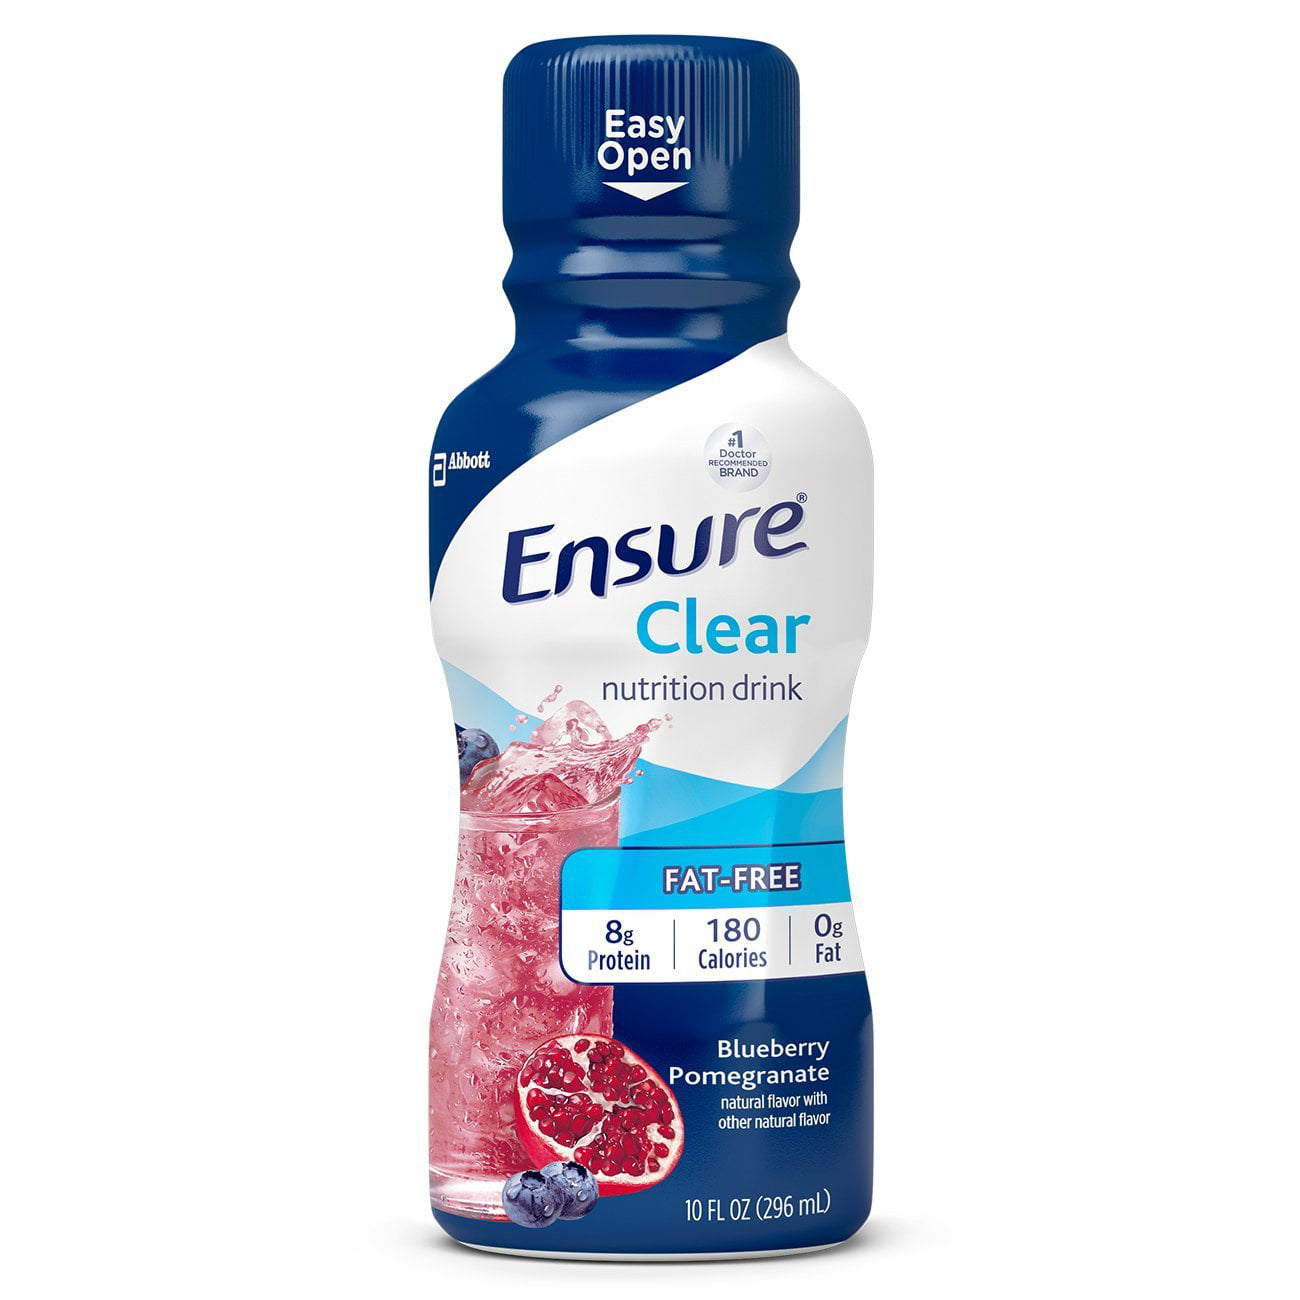 Abbott Ensure Clear Nutrition Drink (High Protein, Fat Free) - Apple, Mixed  Berry, Blueberry 8 oz. Cartons